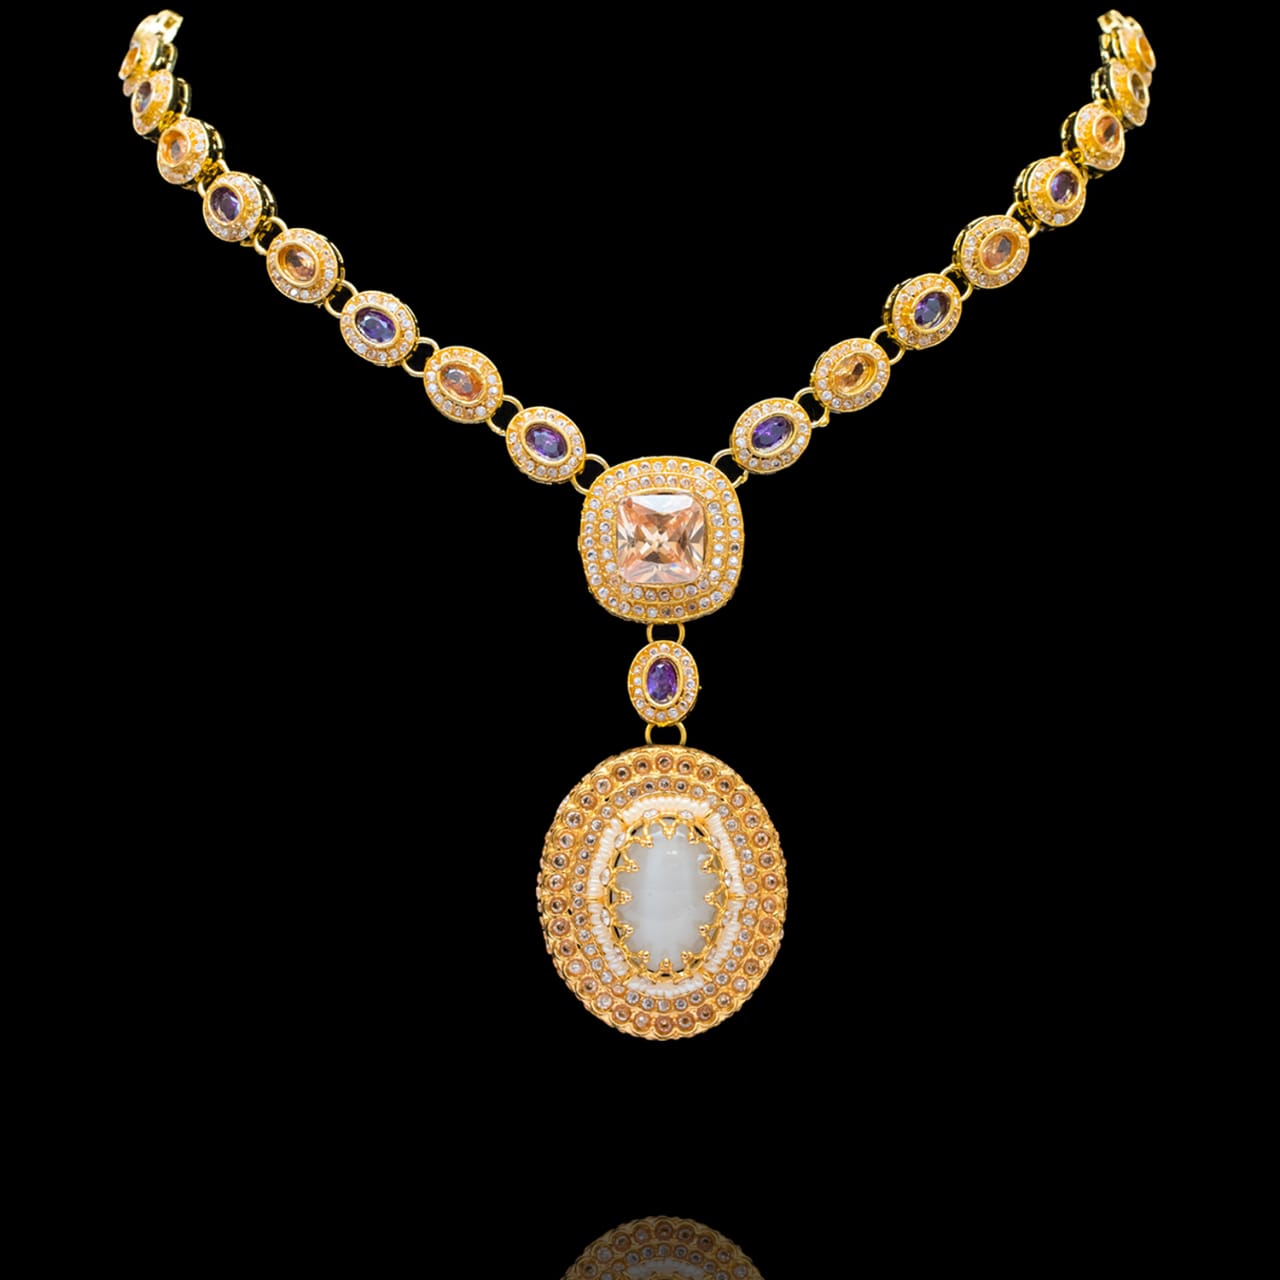 Amila Necklace - Available in 2 Sizes